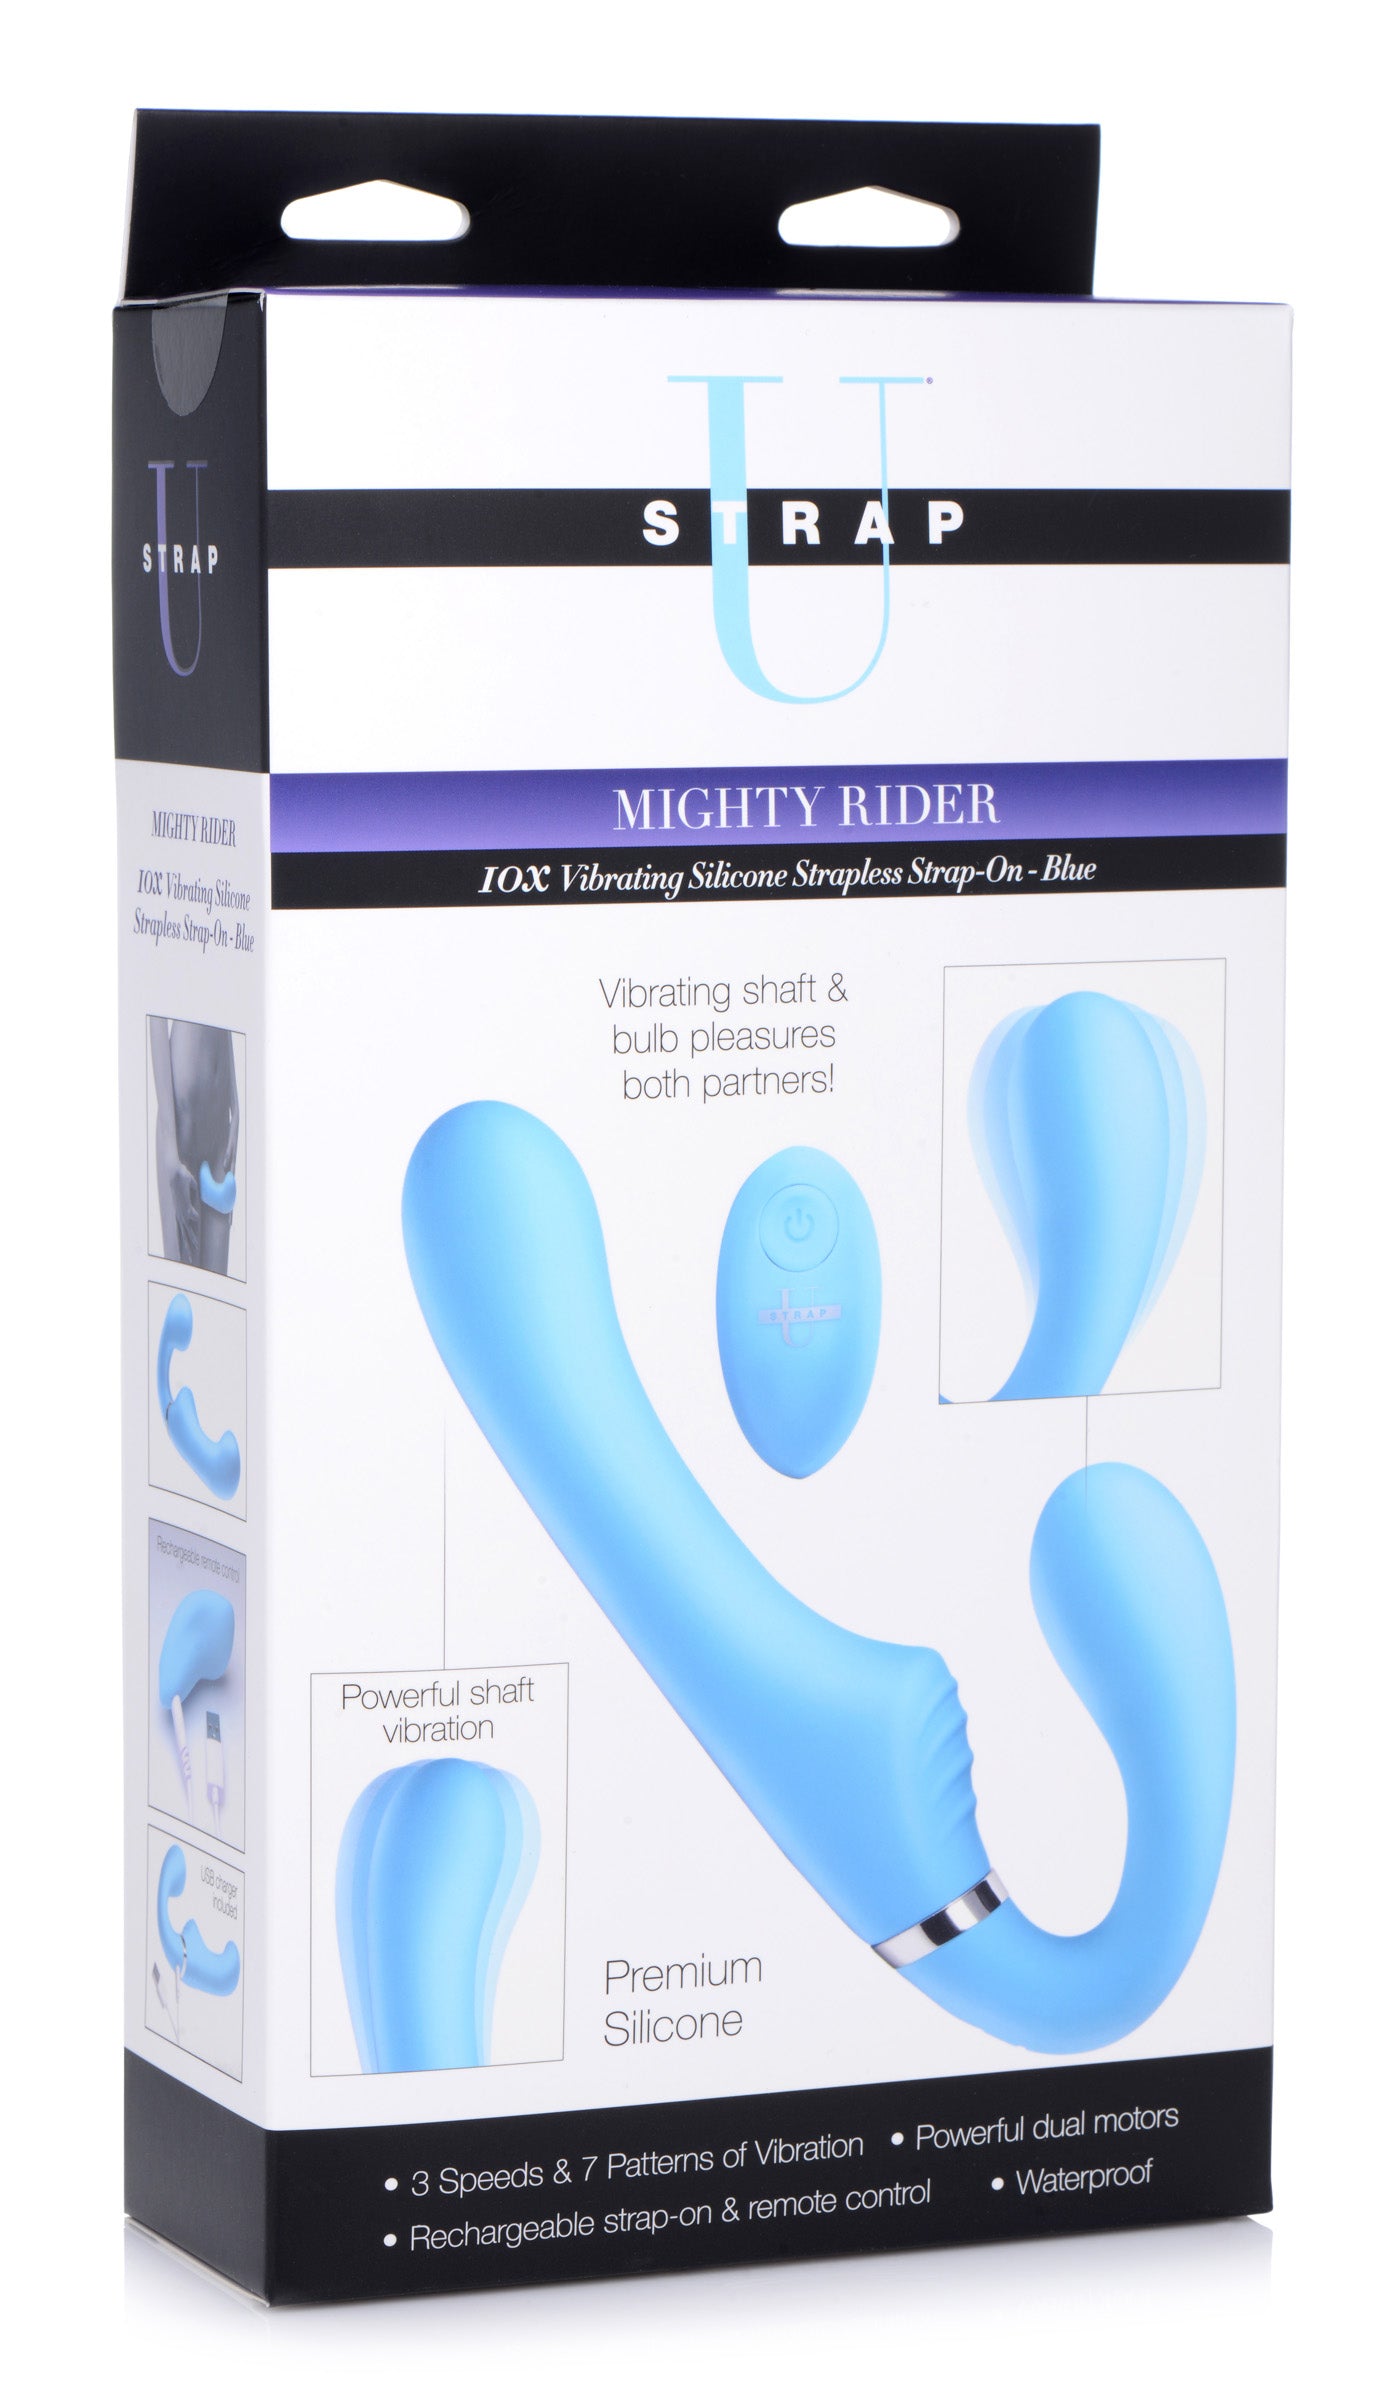 10x Mighty Rider Vibrating Strapless Strap-on - Blue